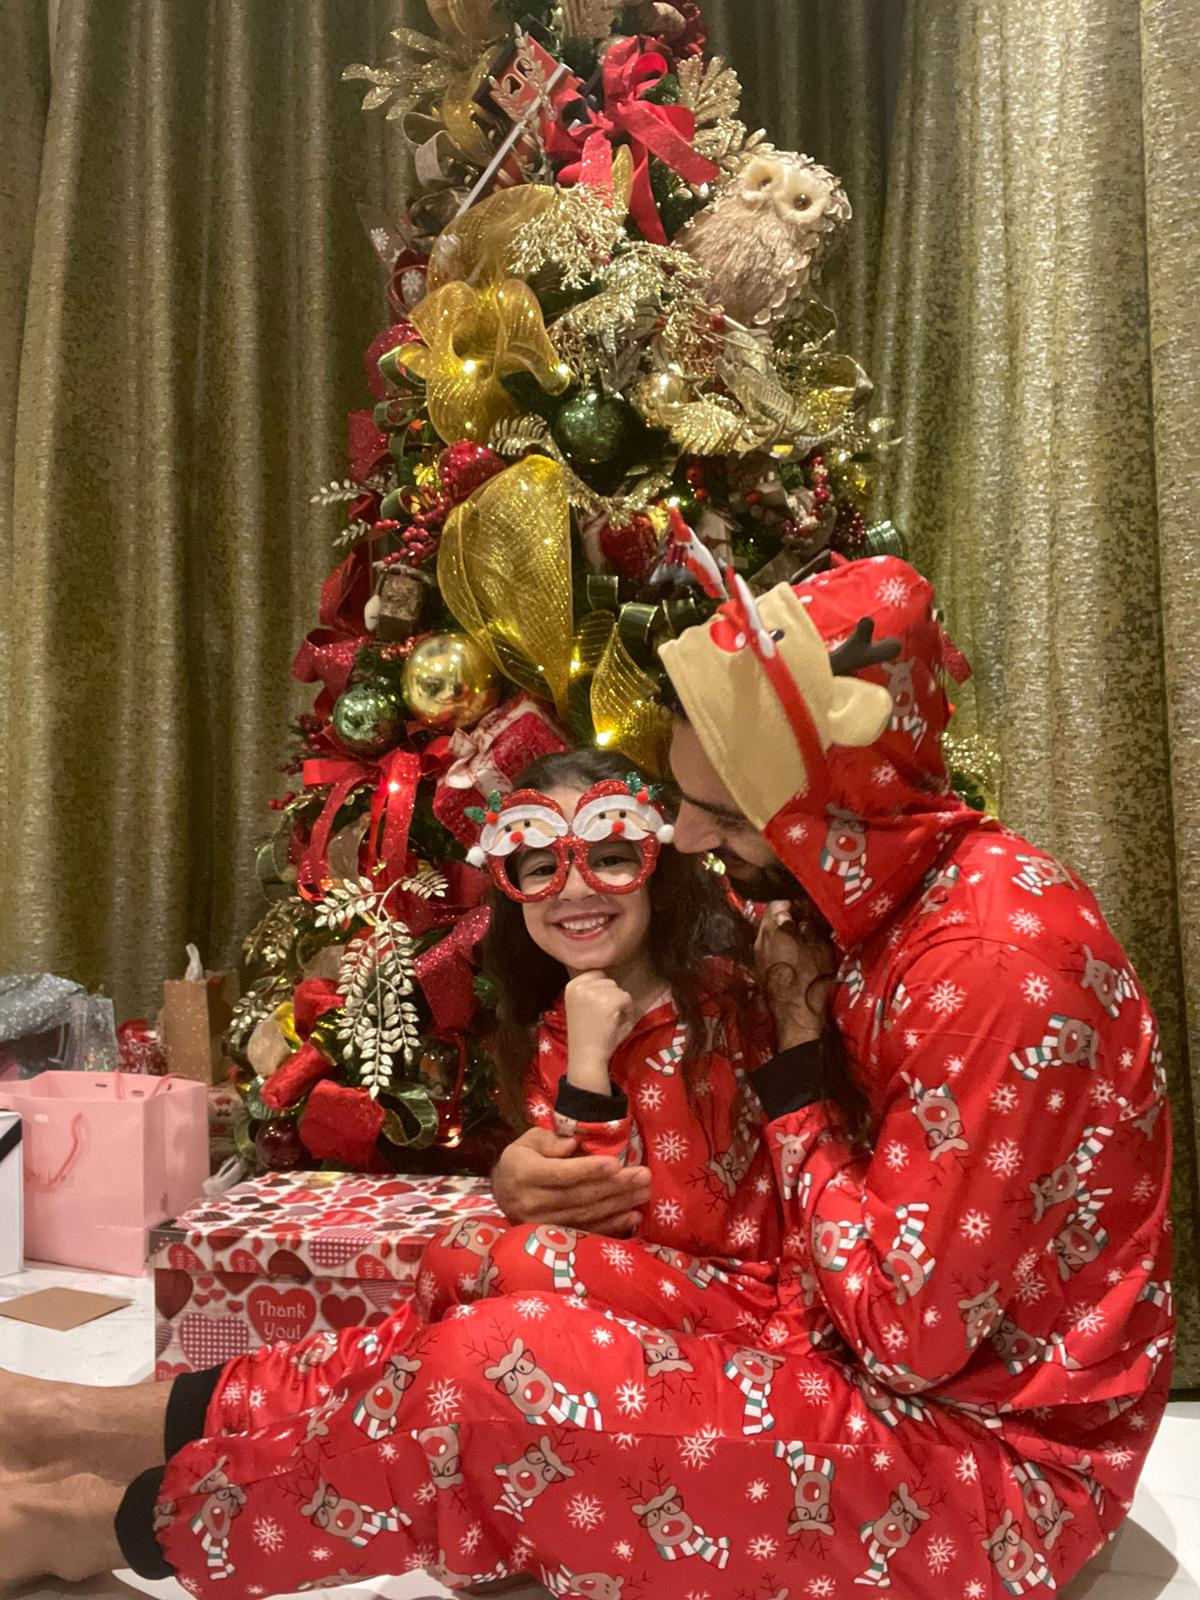 Mohamed Salah celebrates Christmas with his daughters